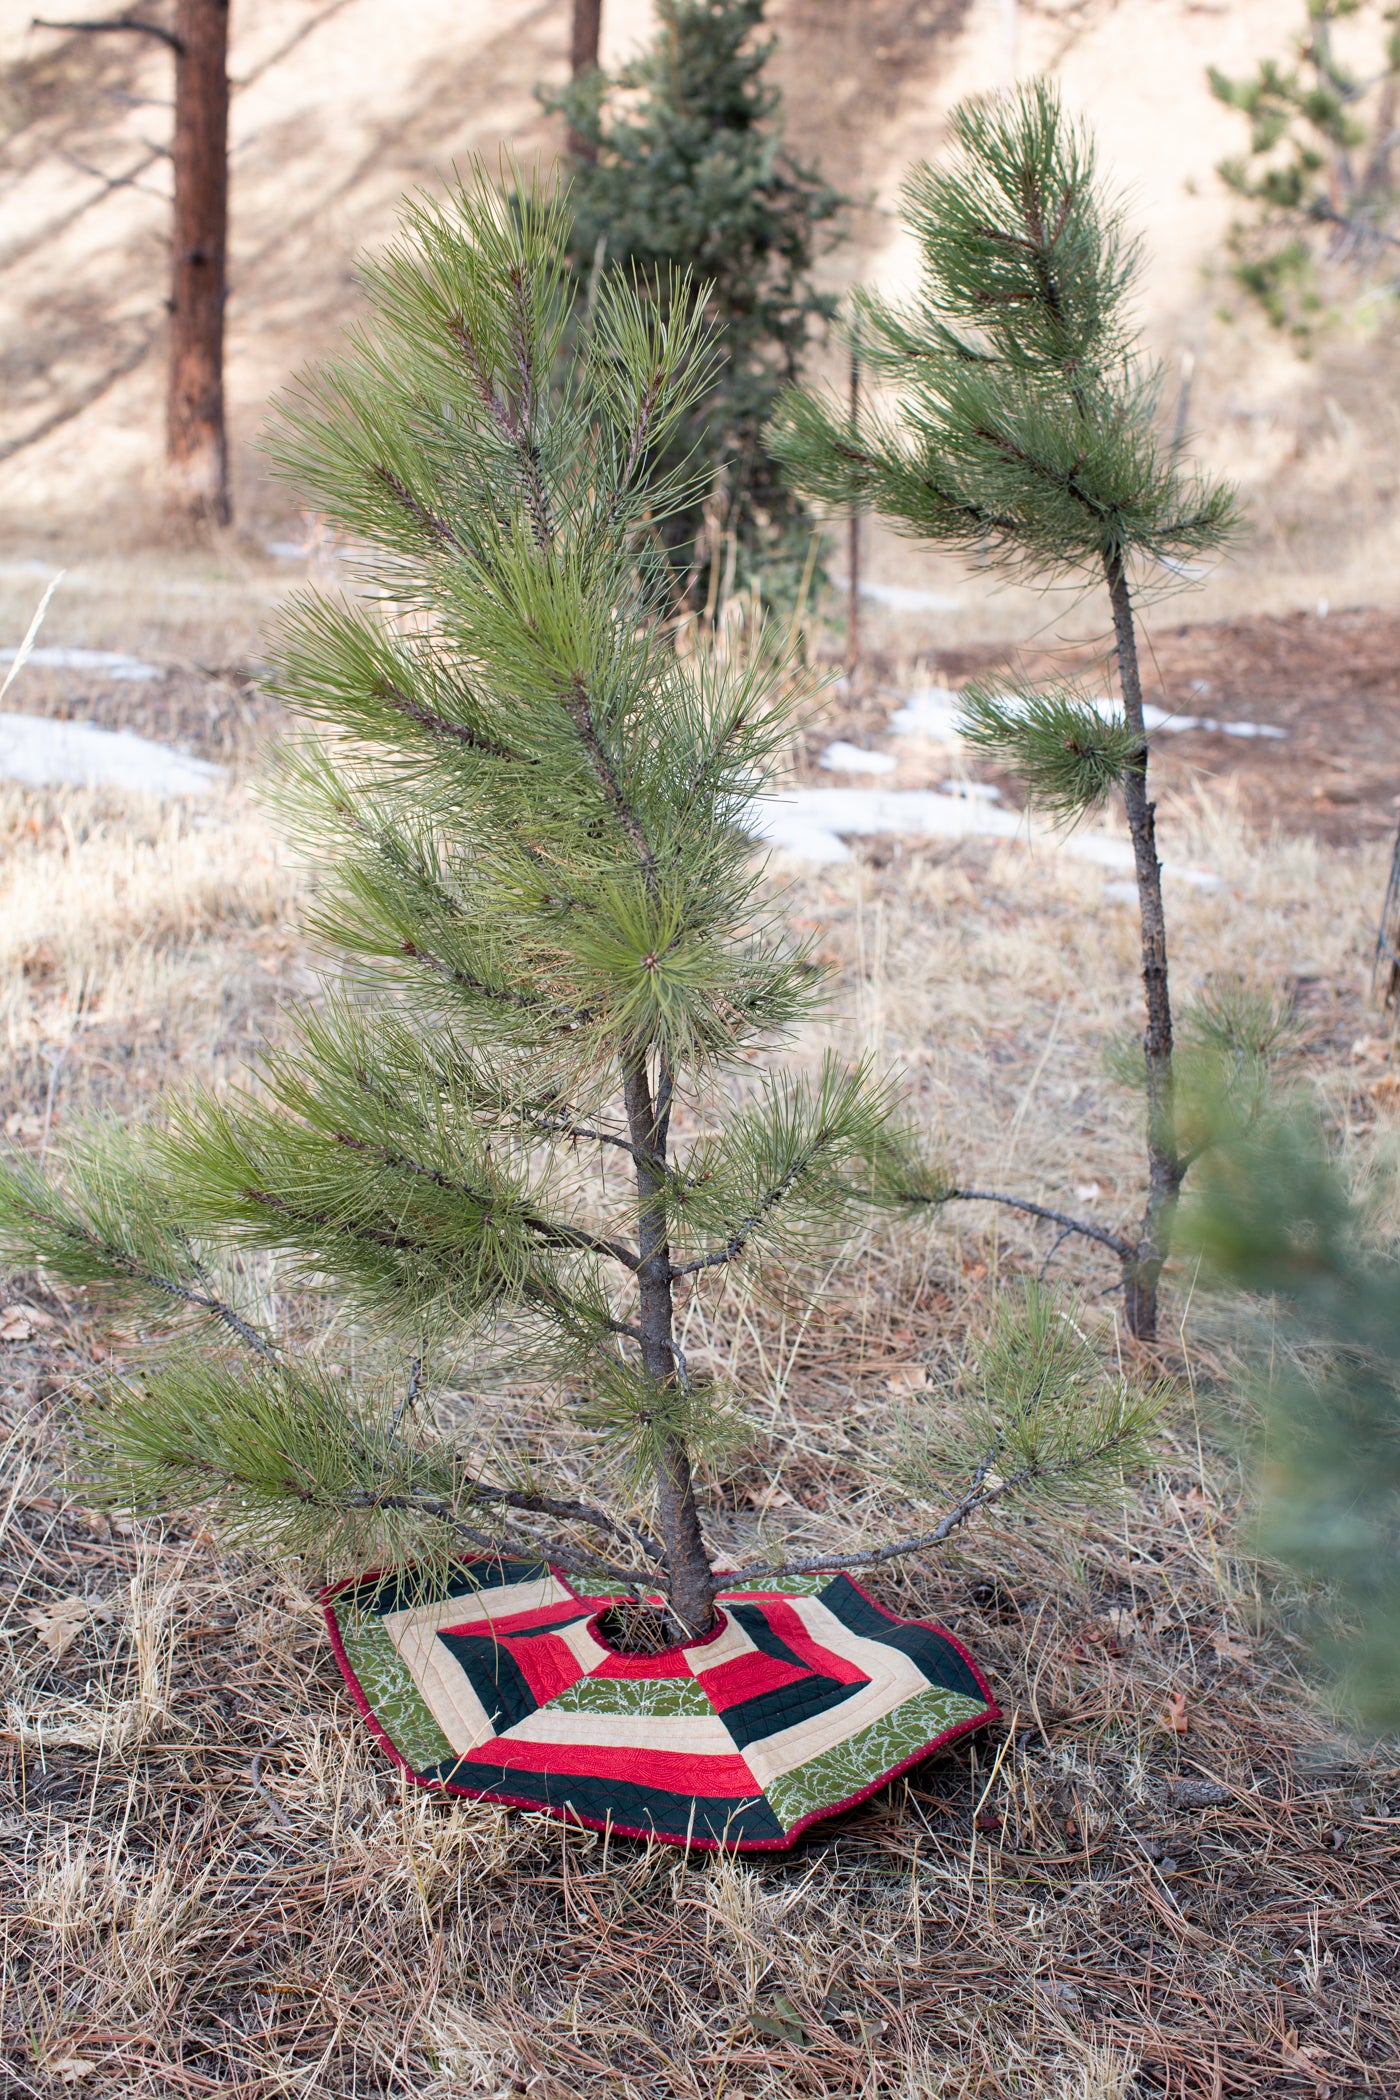 Pine tree outside with a Christmas tree Skirt at the bottom.